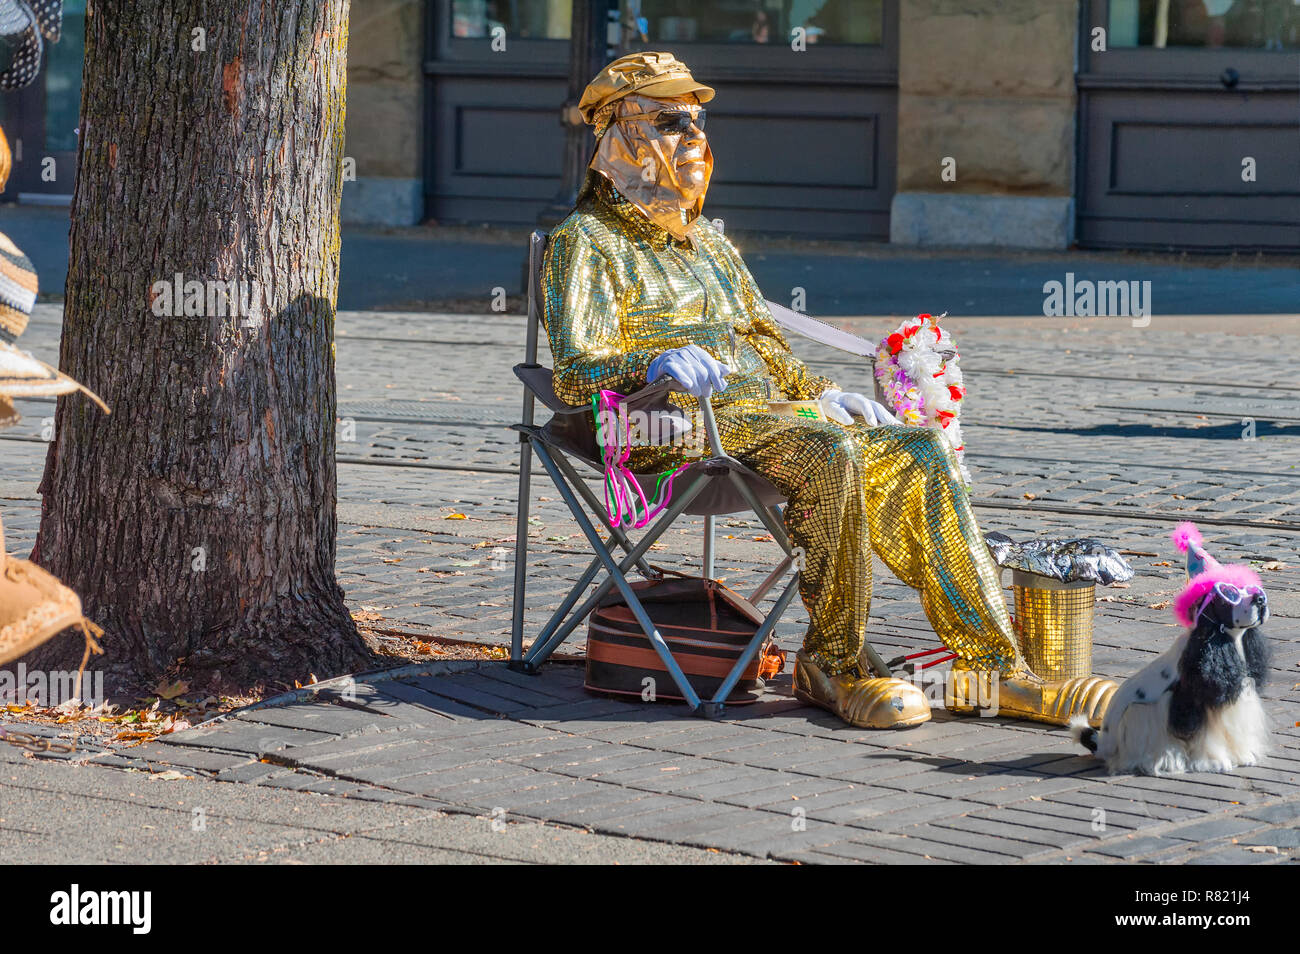 Portland, Oregon, USA - September 20, 2014: A street entertainer dressed as a foil man sits in a camp chair along the Max rails in Ankeny Square with  Stock Photo